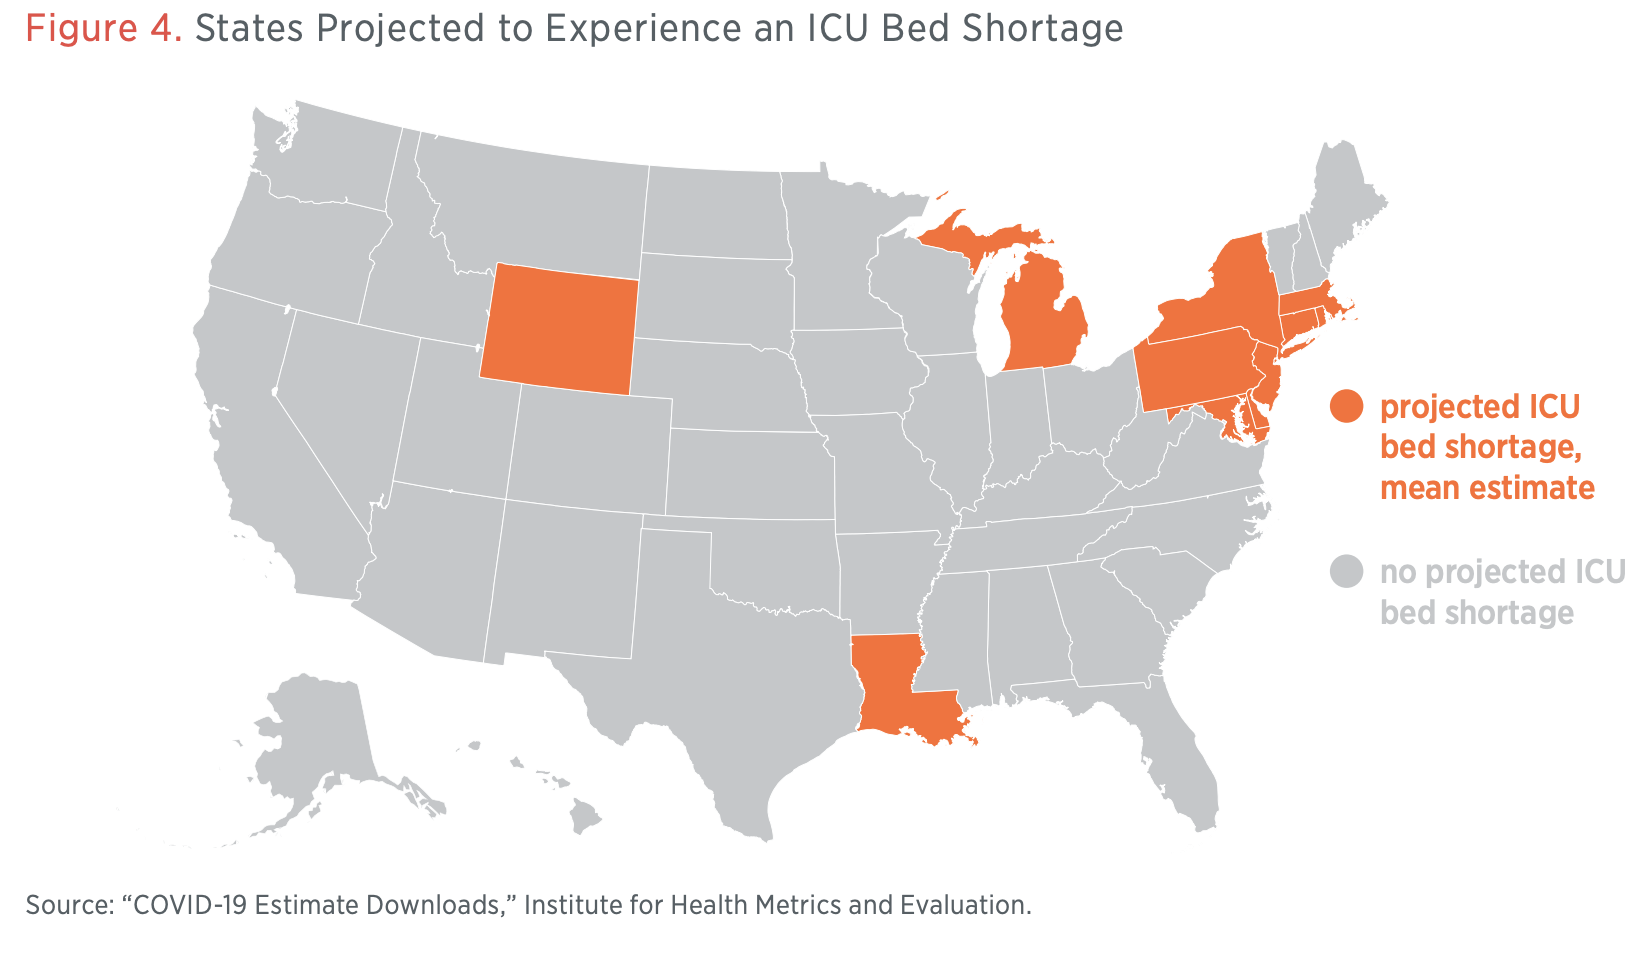 Figure 4. States Projected to Experience an ICU Bed Shortage